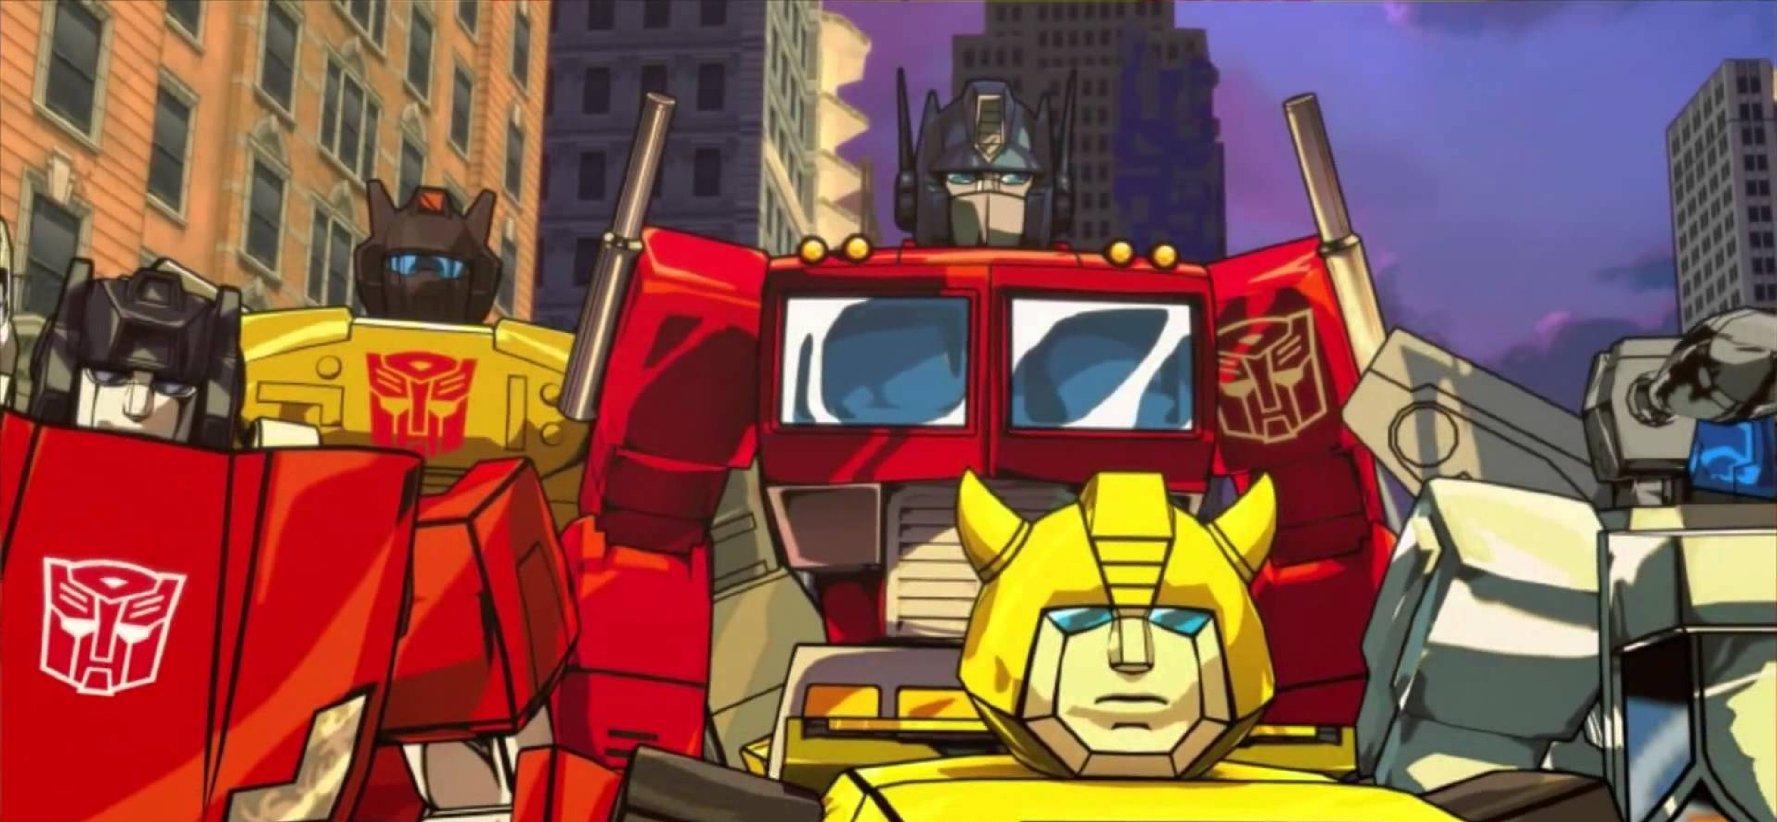 Ranking the characters from the original Transformers